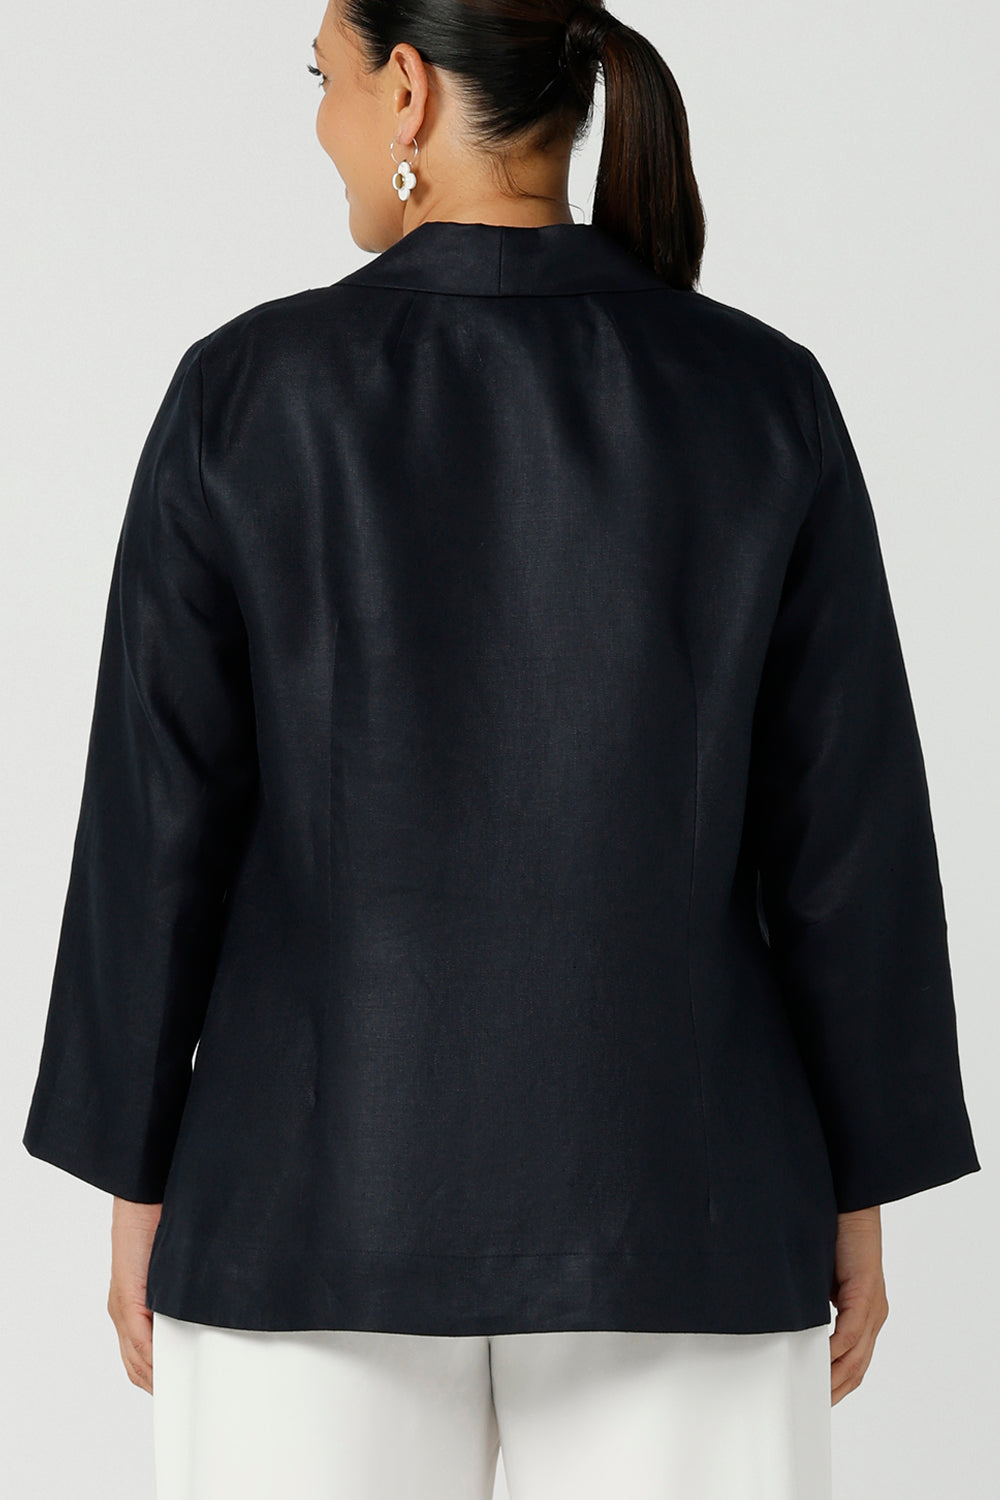 Back view of a size 12 woman wearing a soft linen blazer jacket with a tailored design. A transeasonal linen work jacket, in a beautiful midnight navy colour. Australian-made using sustainable 100% linen fabric. Size-inclusive fashion 8-24 for corporate casual workwear.